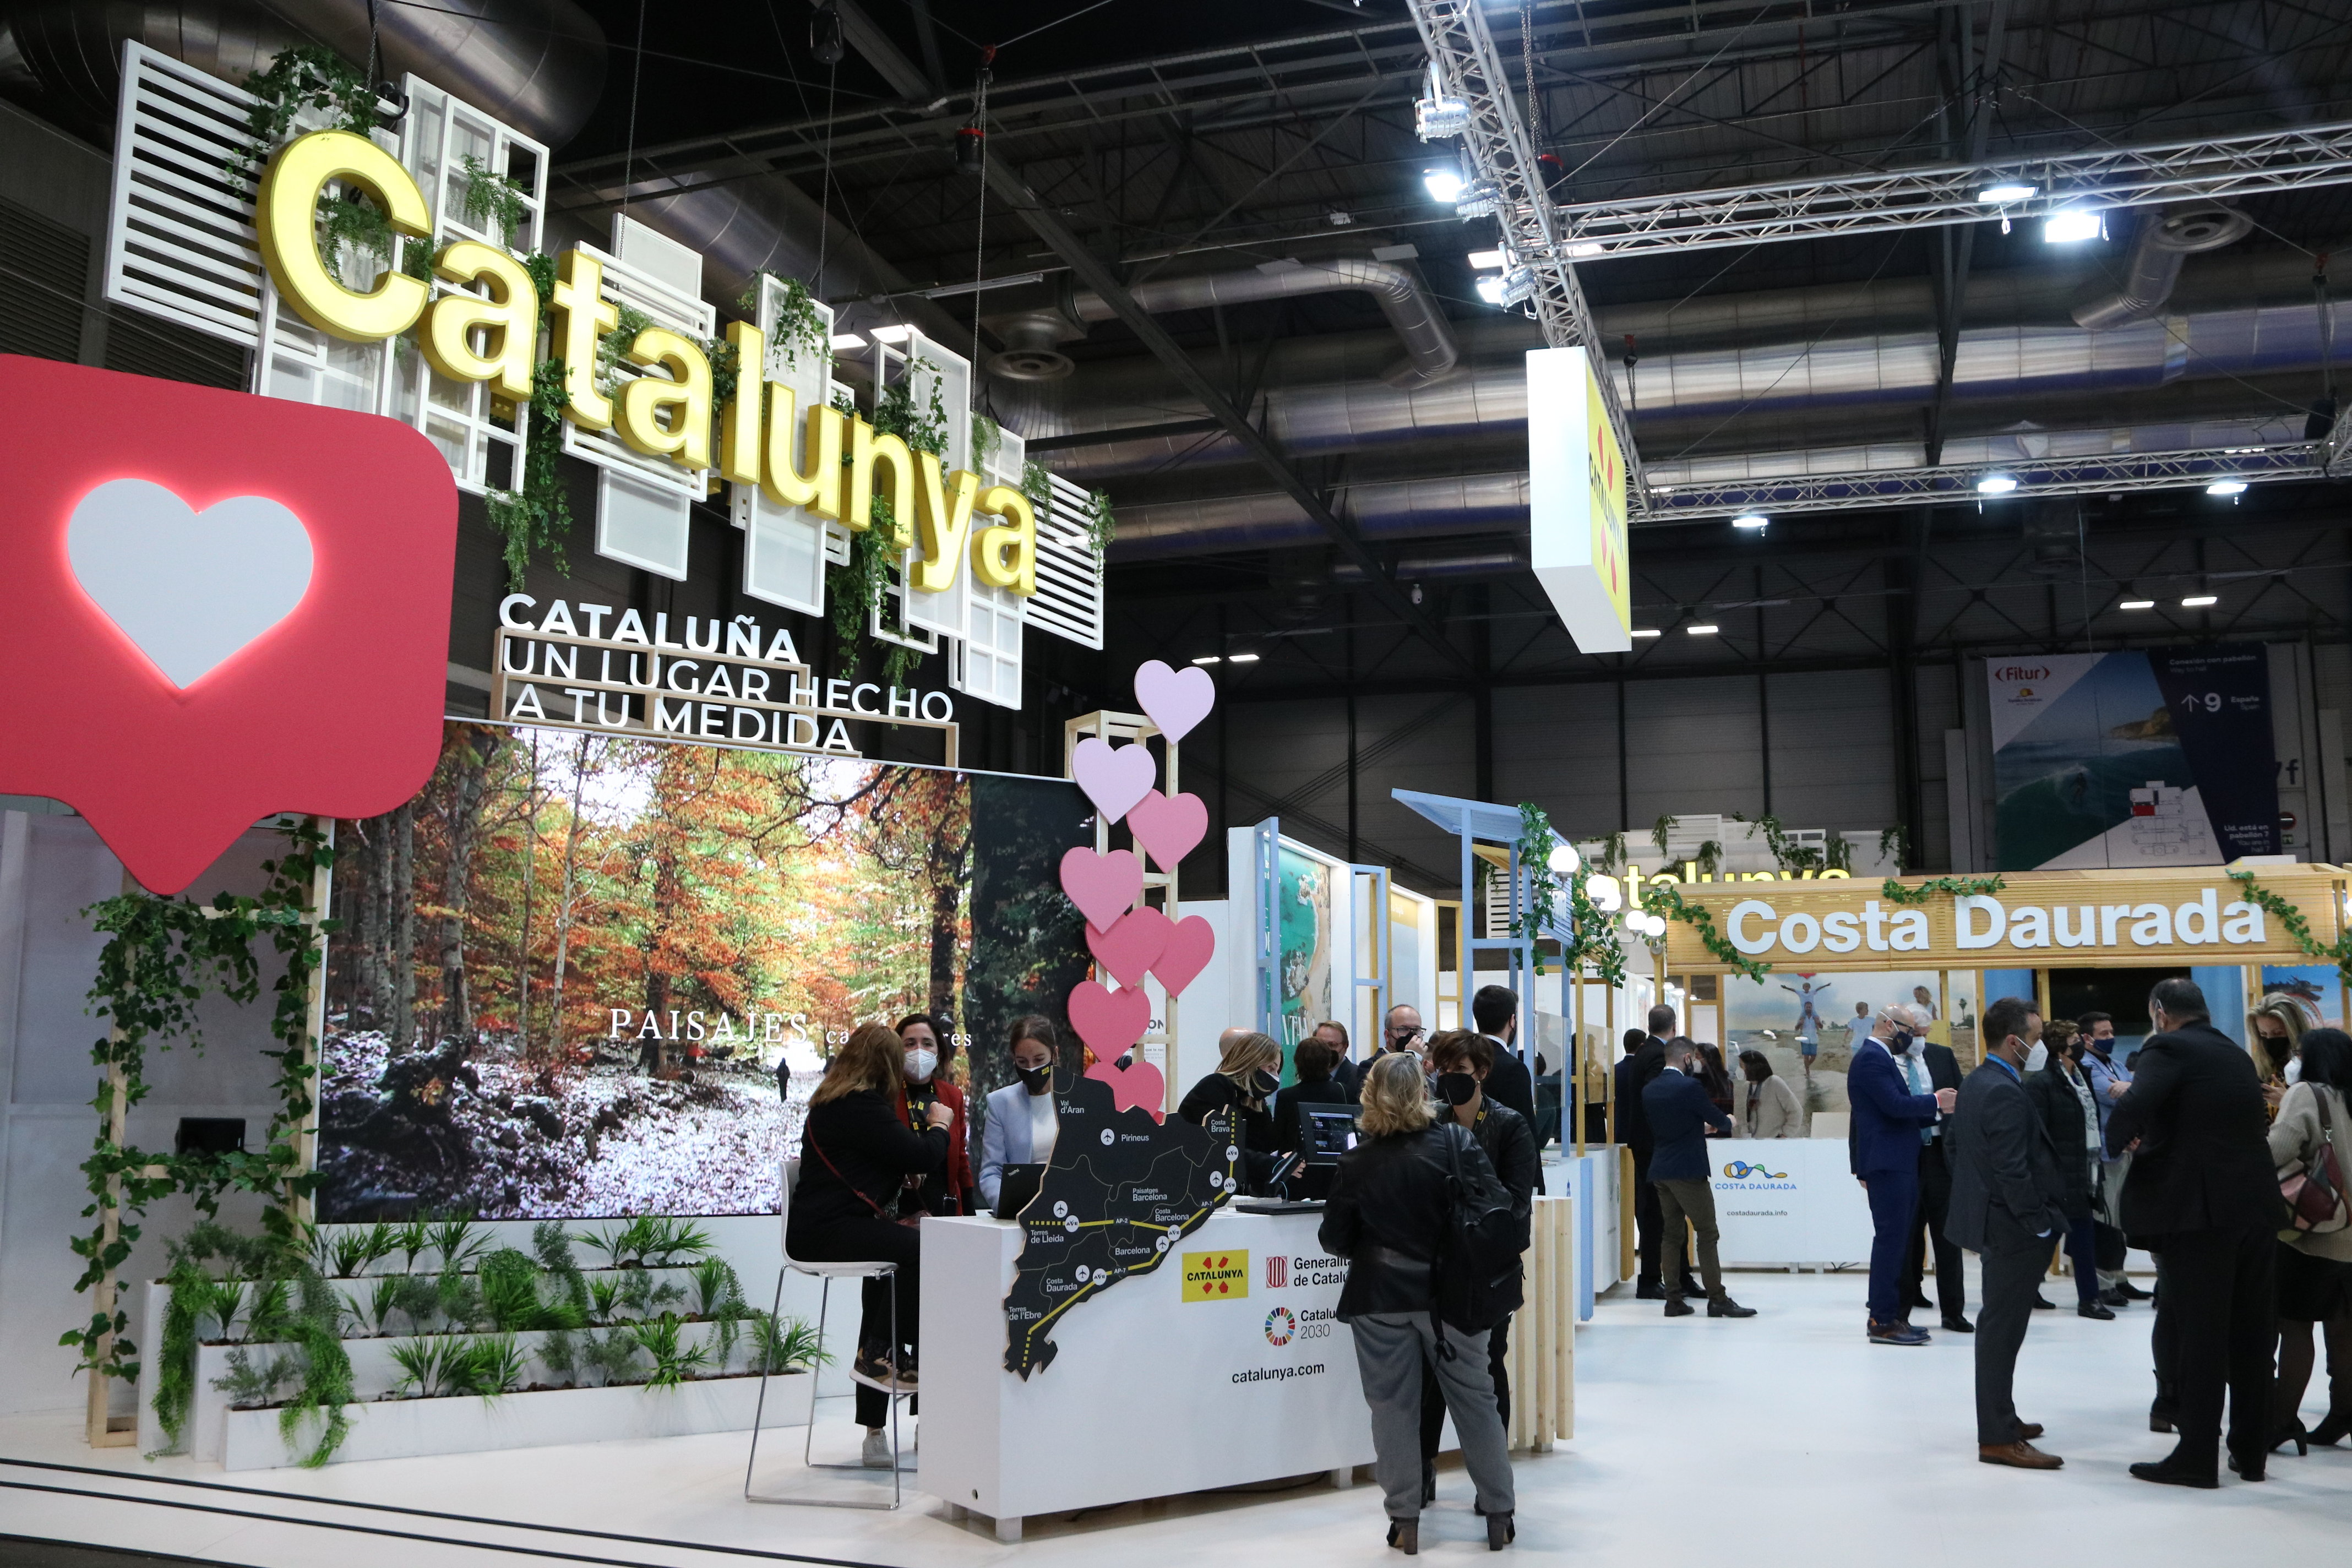 Catalonia's Tourism stand at Madrid's FITUR fair on January 19, 2022 (by Andrea Zamorano)